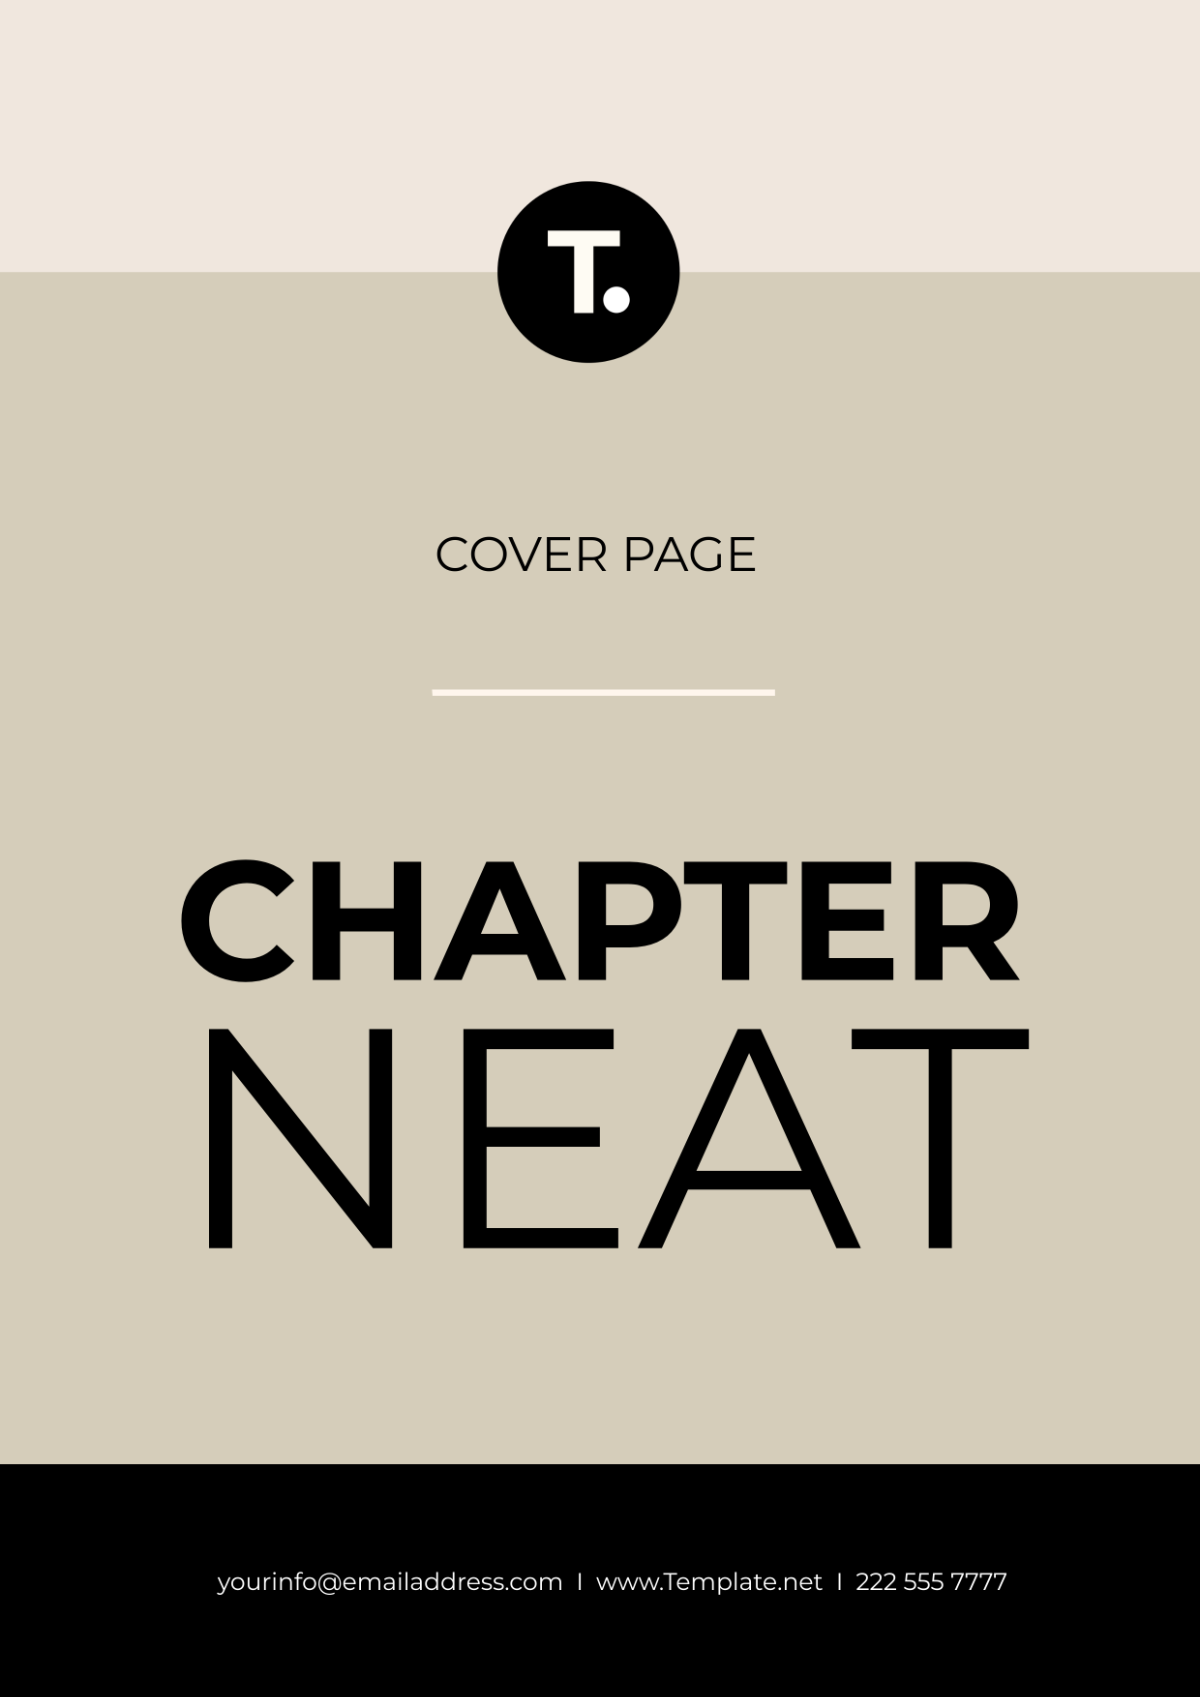 Free Chapter Neat Cover Page Template